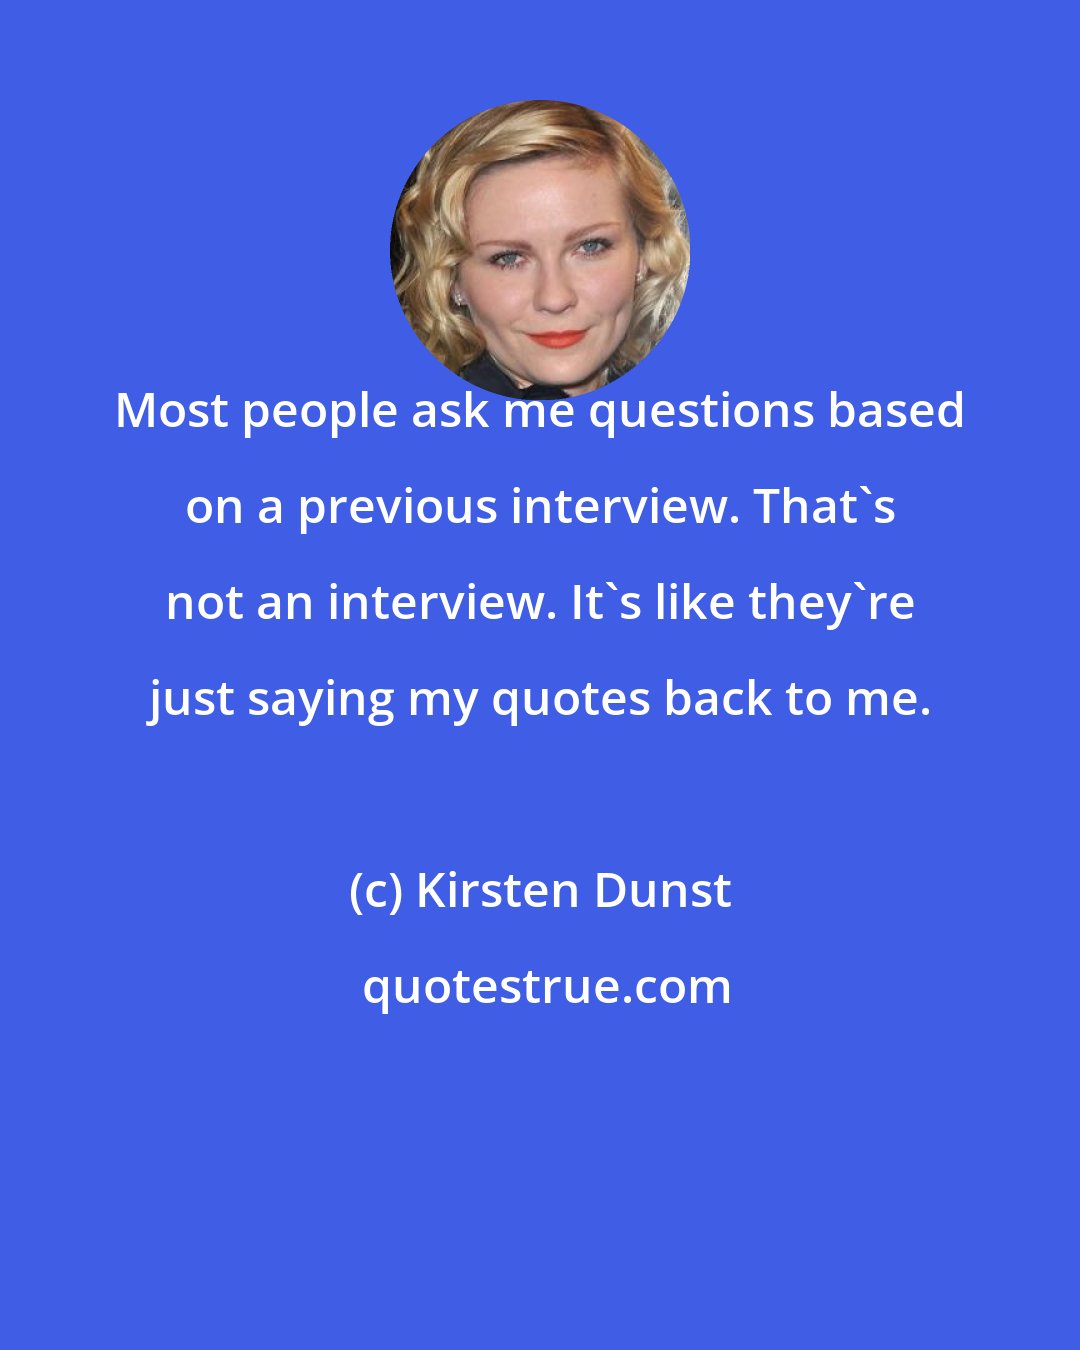 Kirsten Dunst: Most people ask me questions based on a previous interview. That's not an interview. It's like they're just saying my quotes back to me.